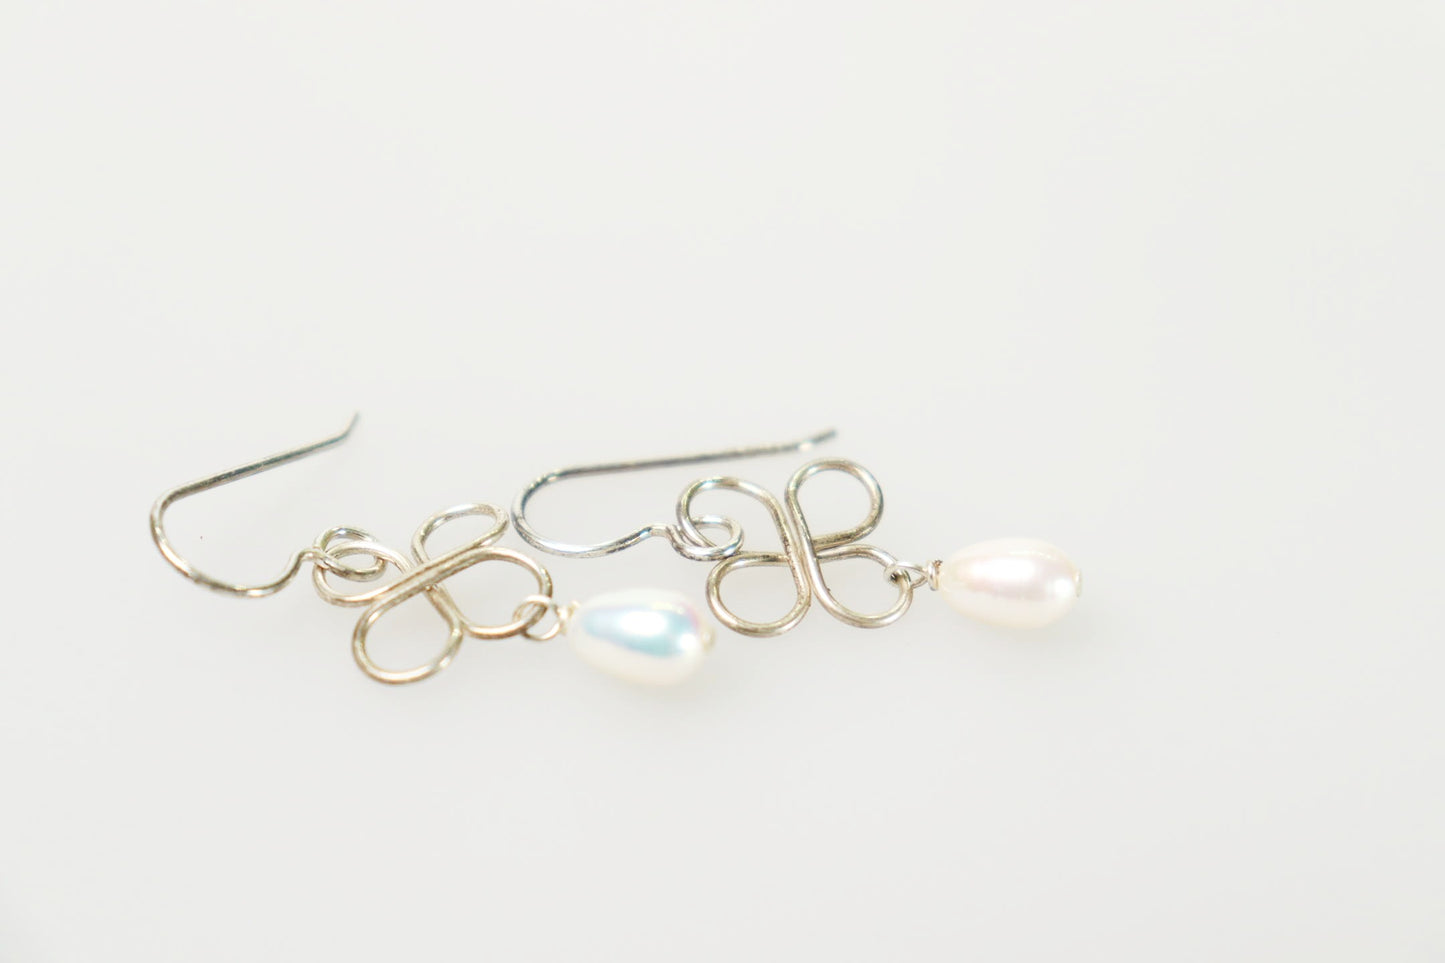 Clover Sterling Silver and Freshwater Pearl Earrings